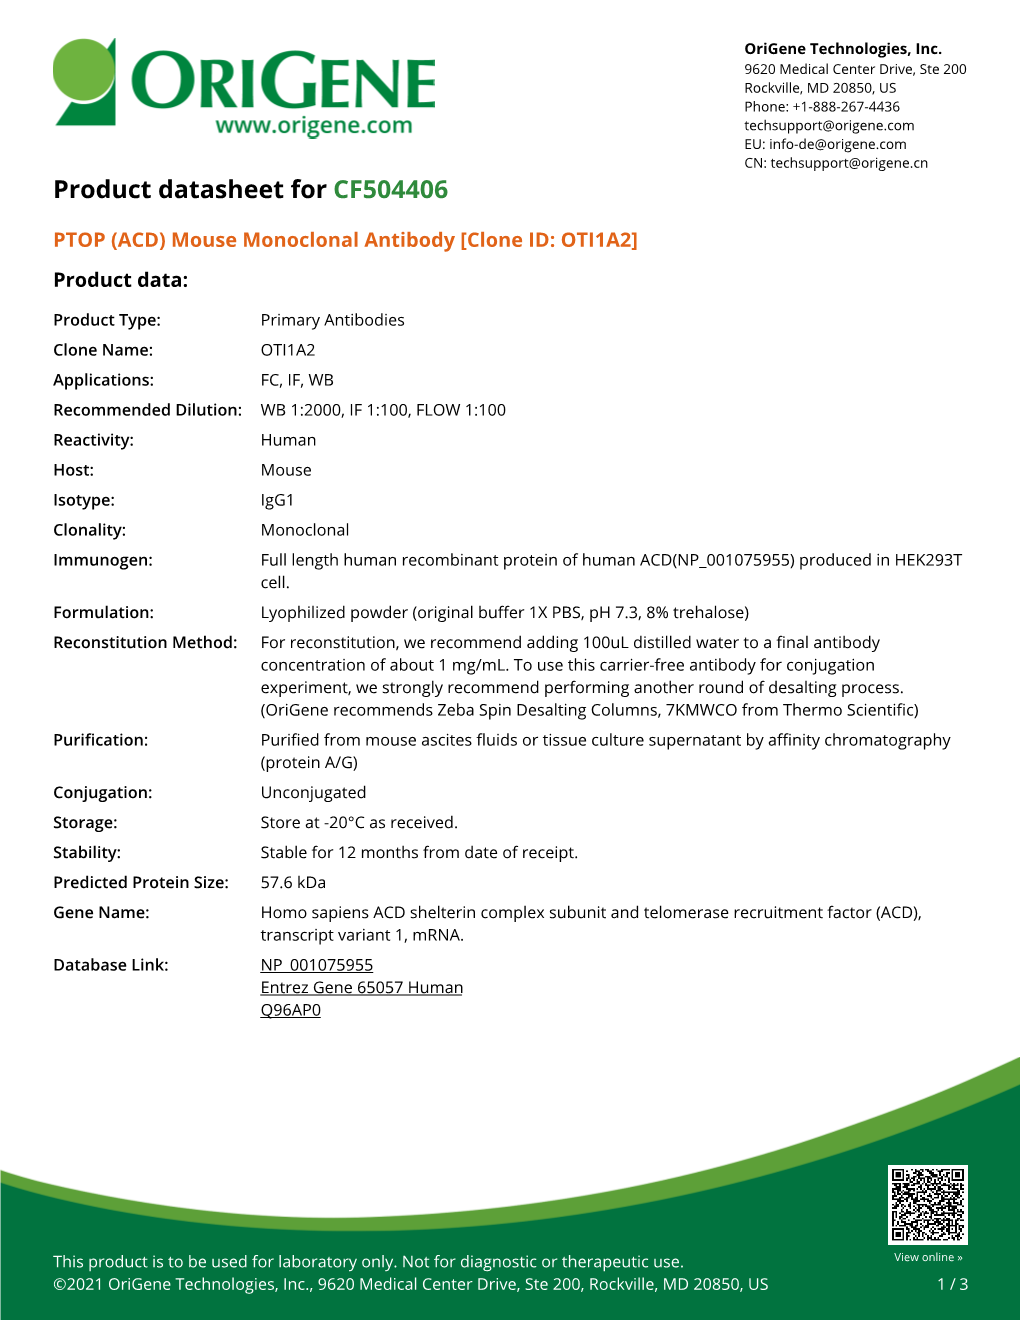 PTOP (ACD) Mouse Monoclonal Antibody [Clone ID: OTI1A2] Product Data